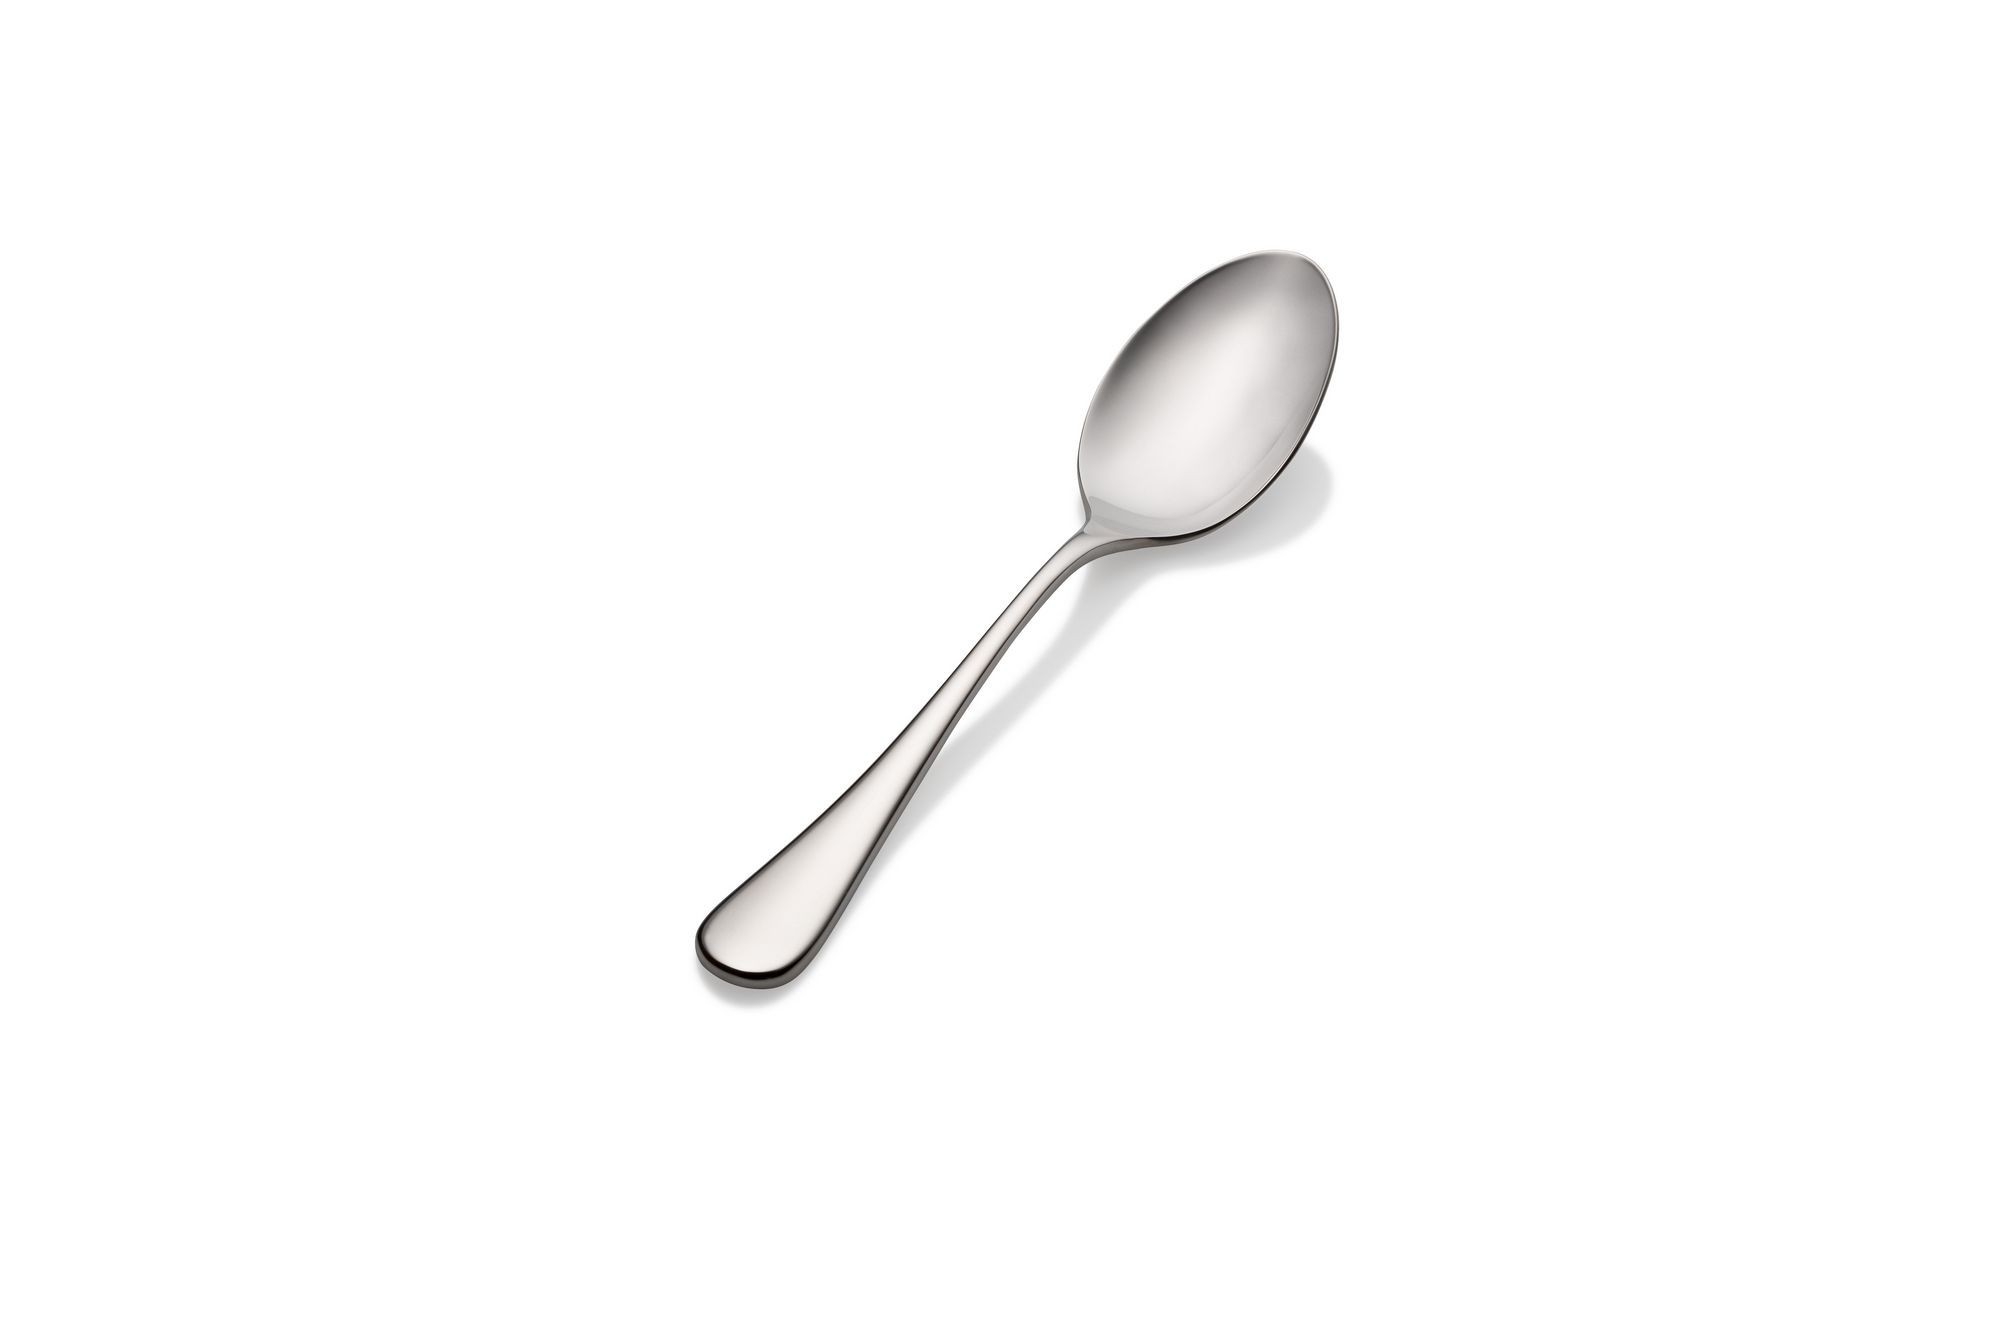 Bon Chef S4004S Como 18/8 Stainless Steel  Serving Spoon